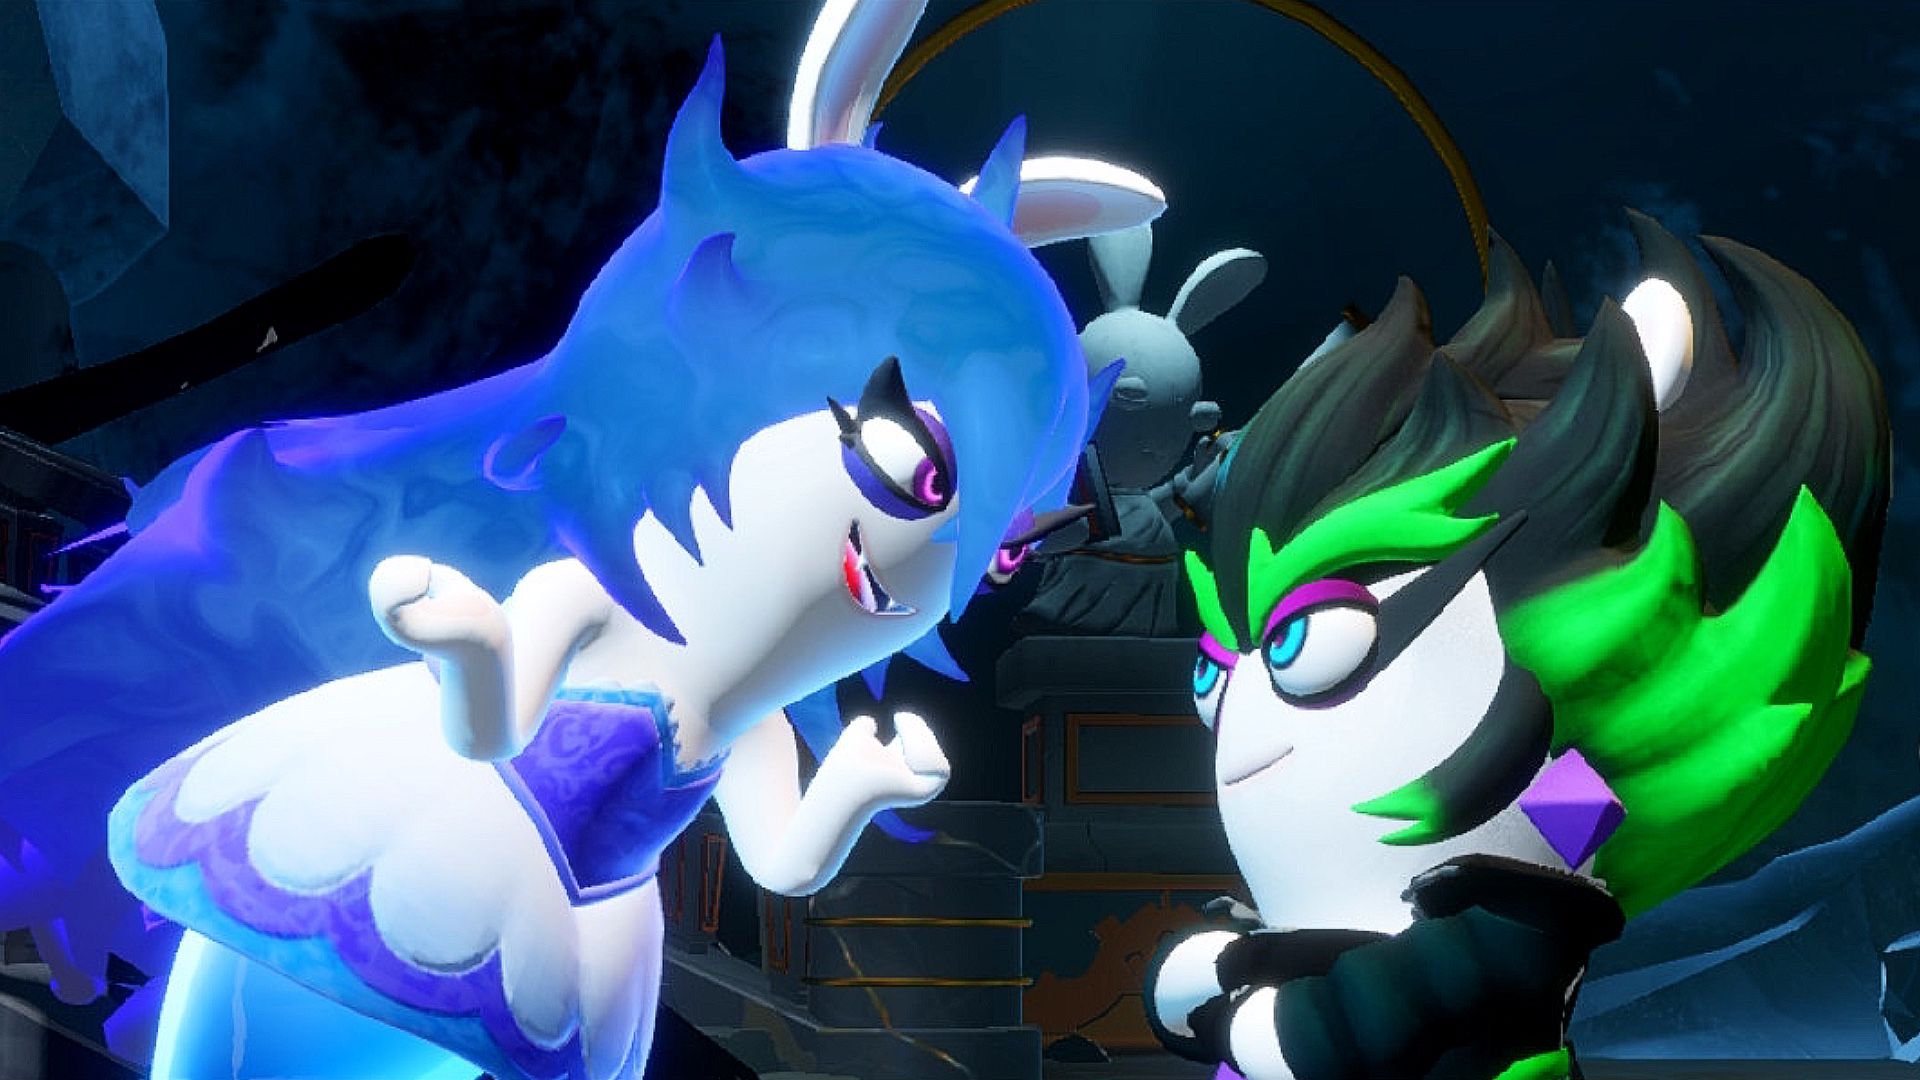 Edge and Midnite have a stare-down before the heroes battle her in Sparks of Hope